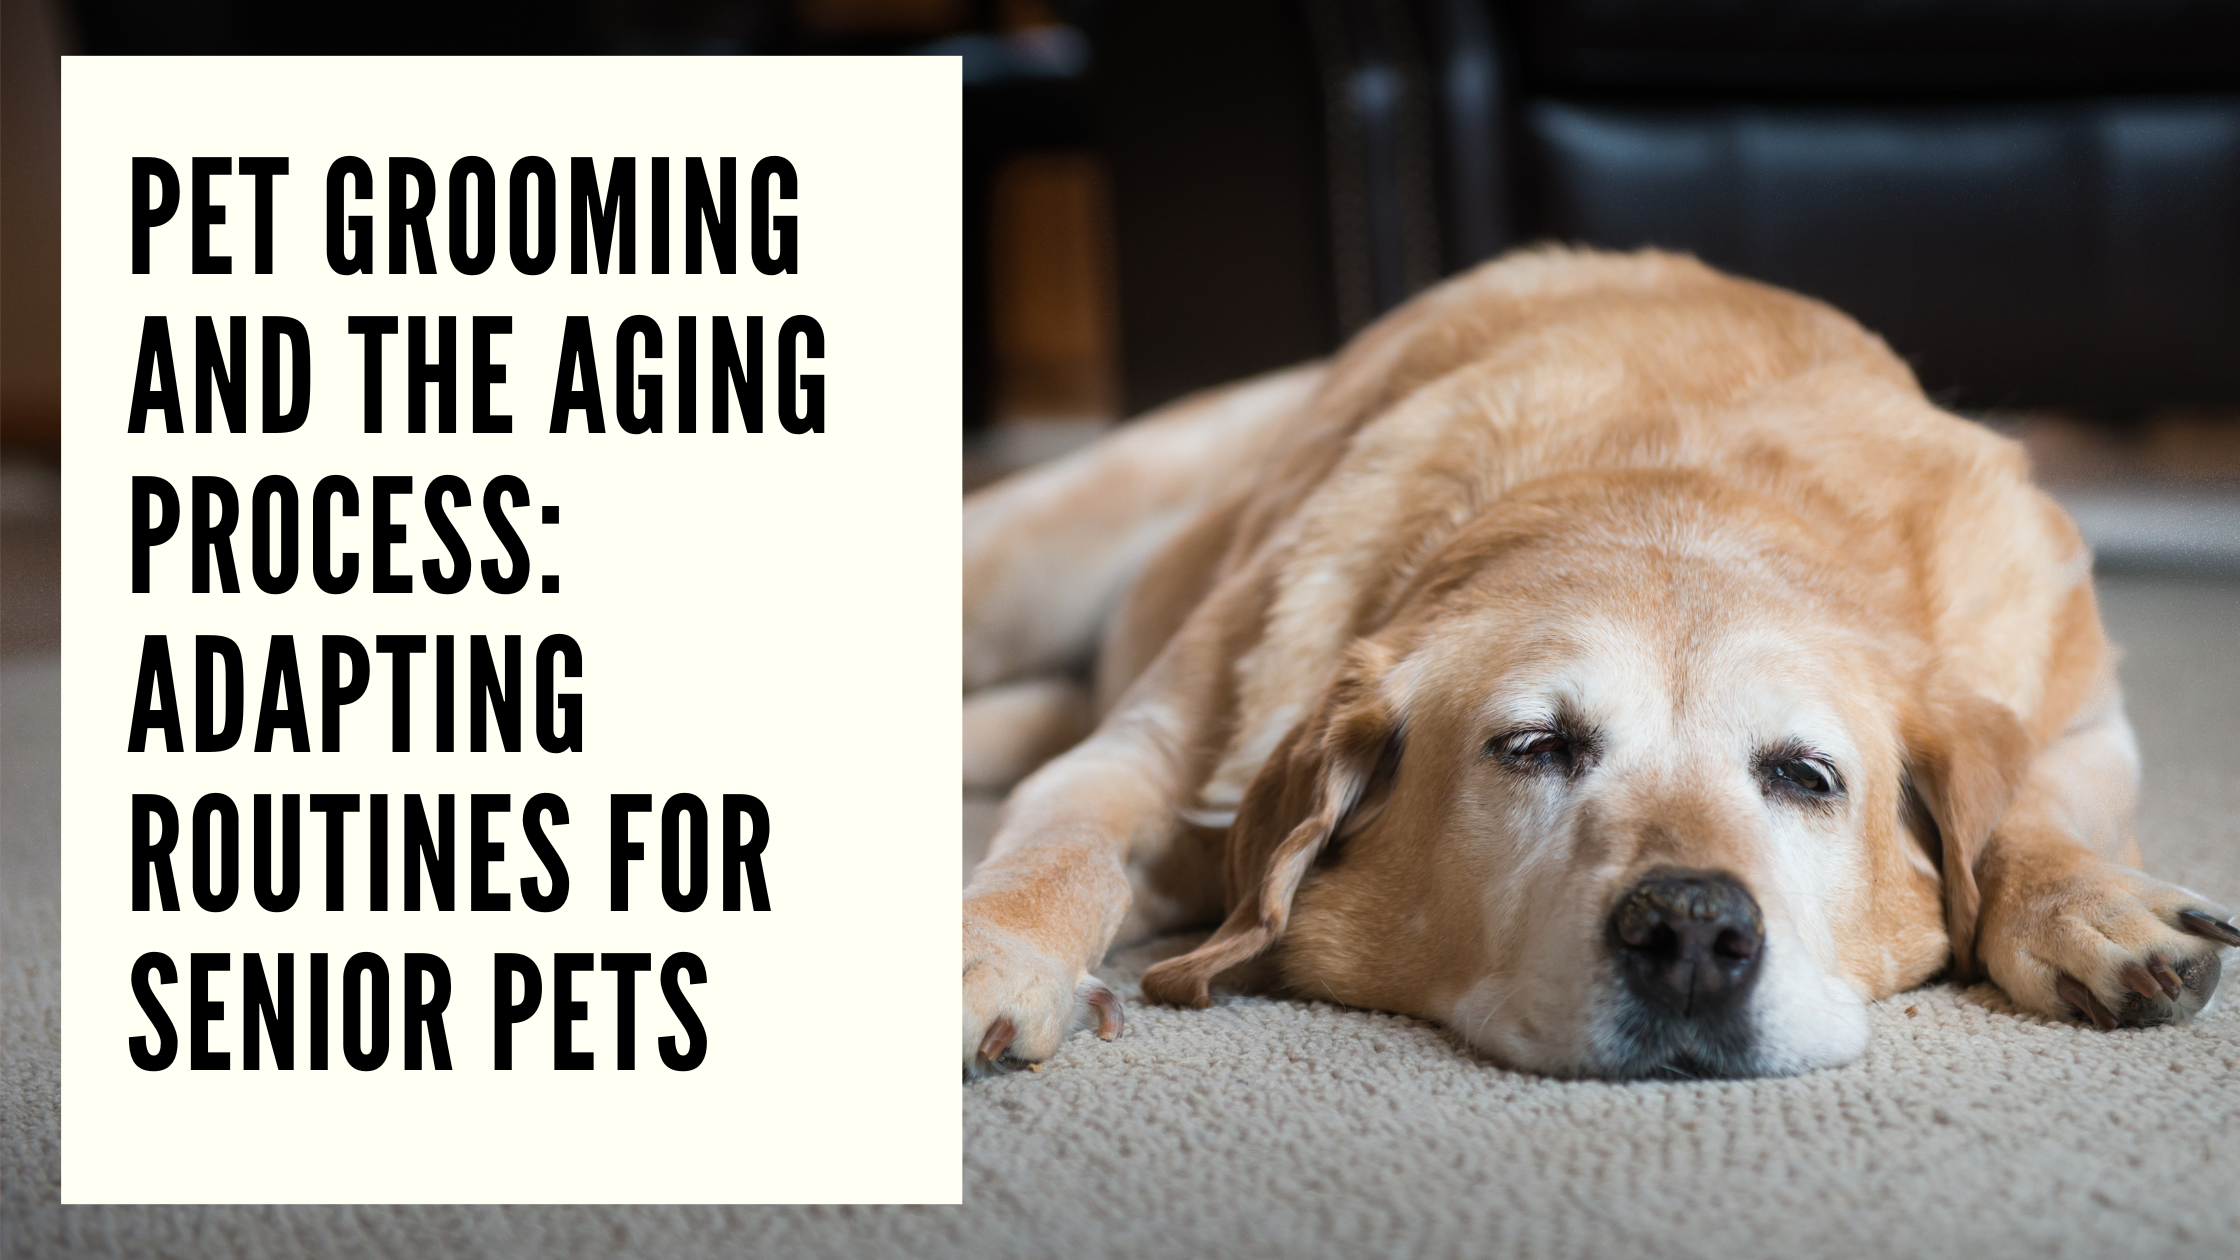 Pet Grooming and the Aging Process Adapting Routines for Senior Pets